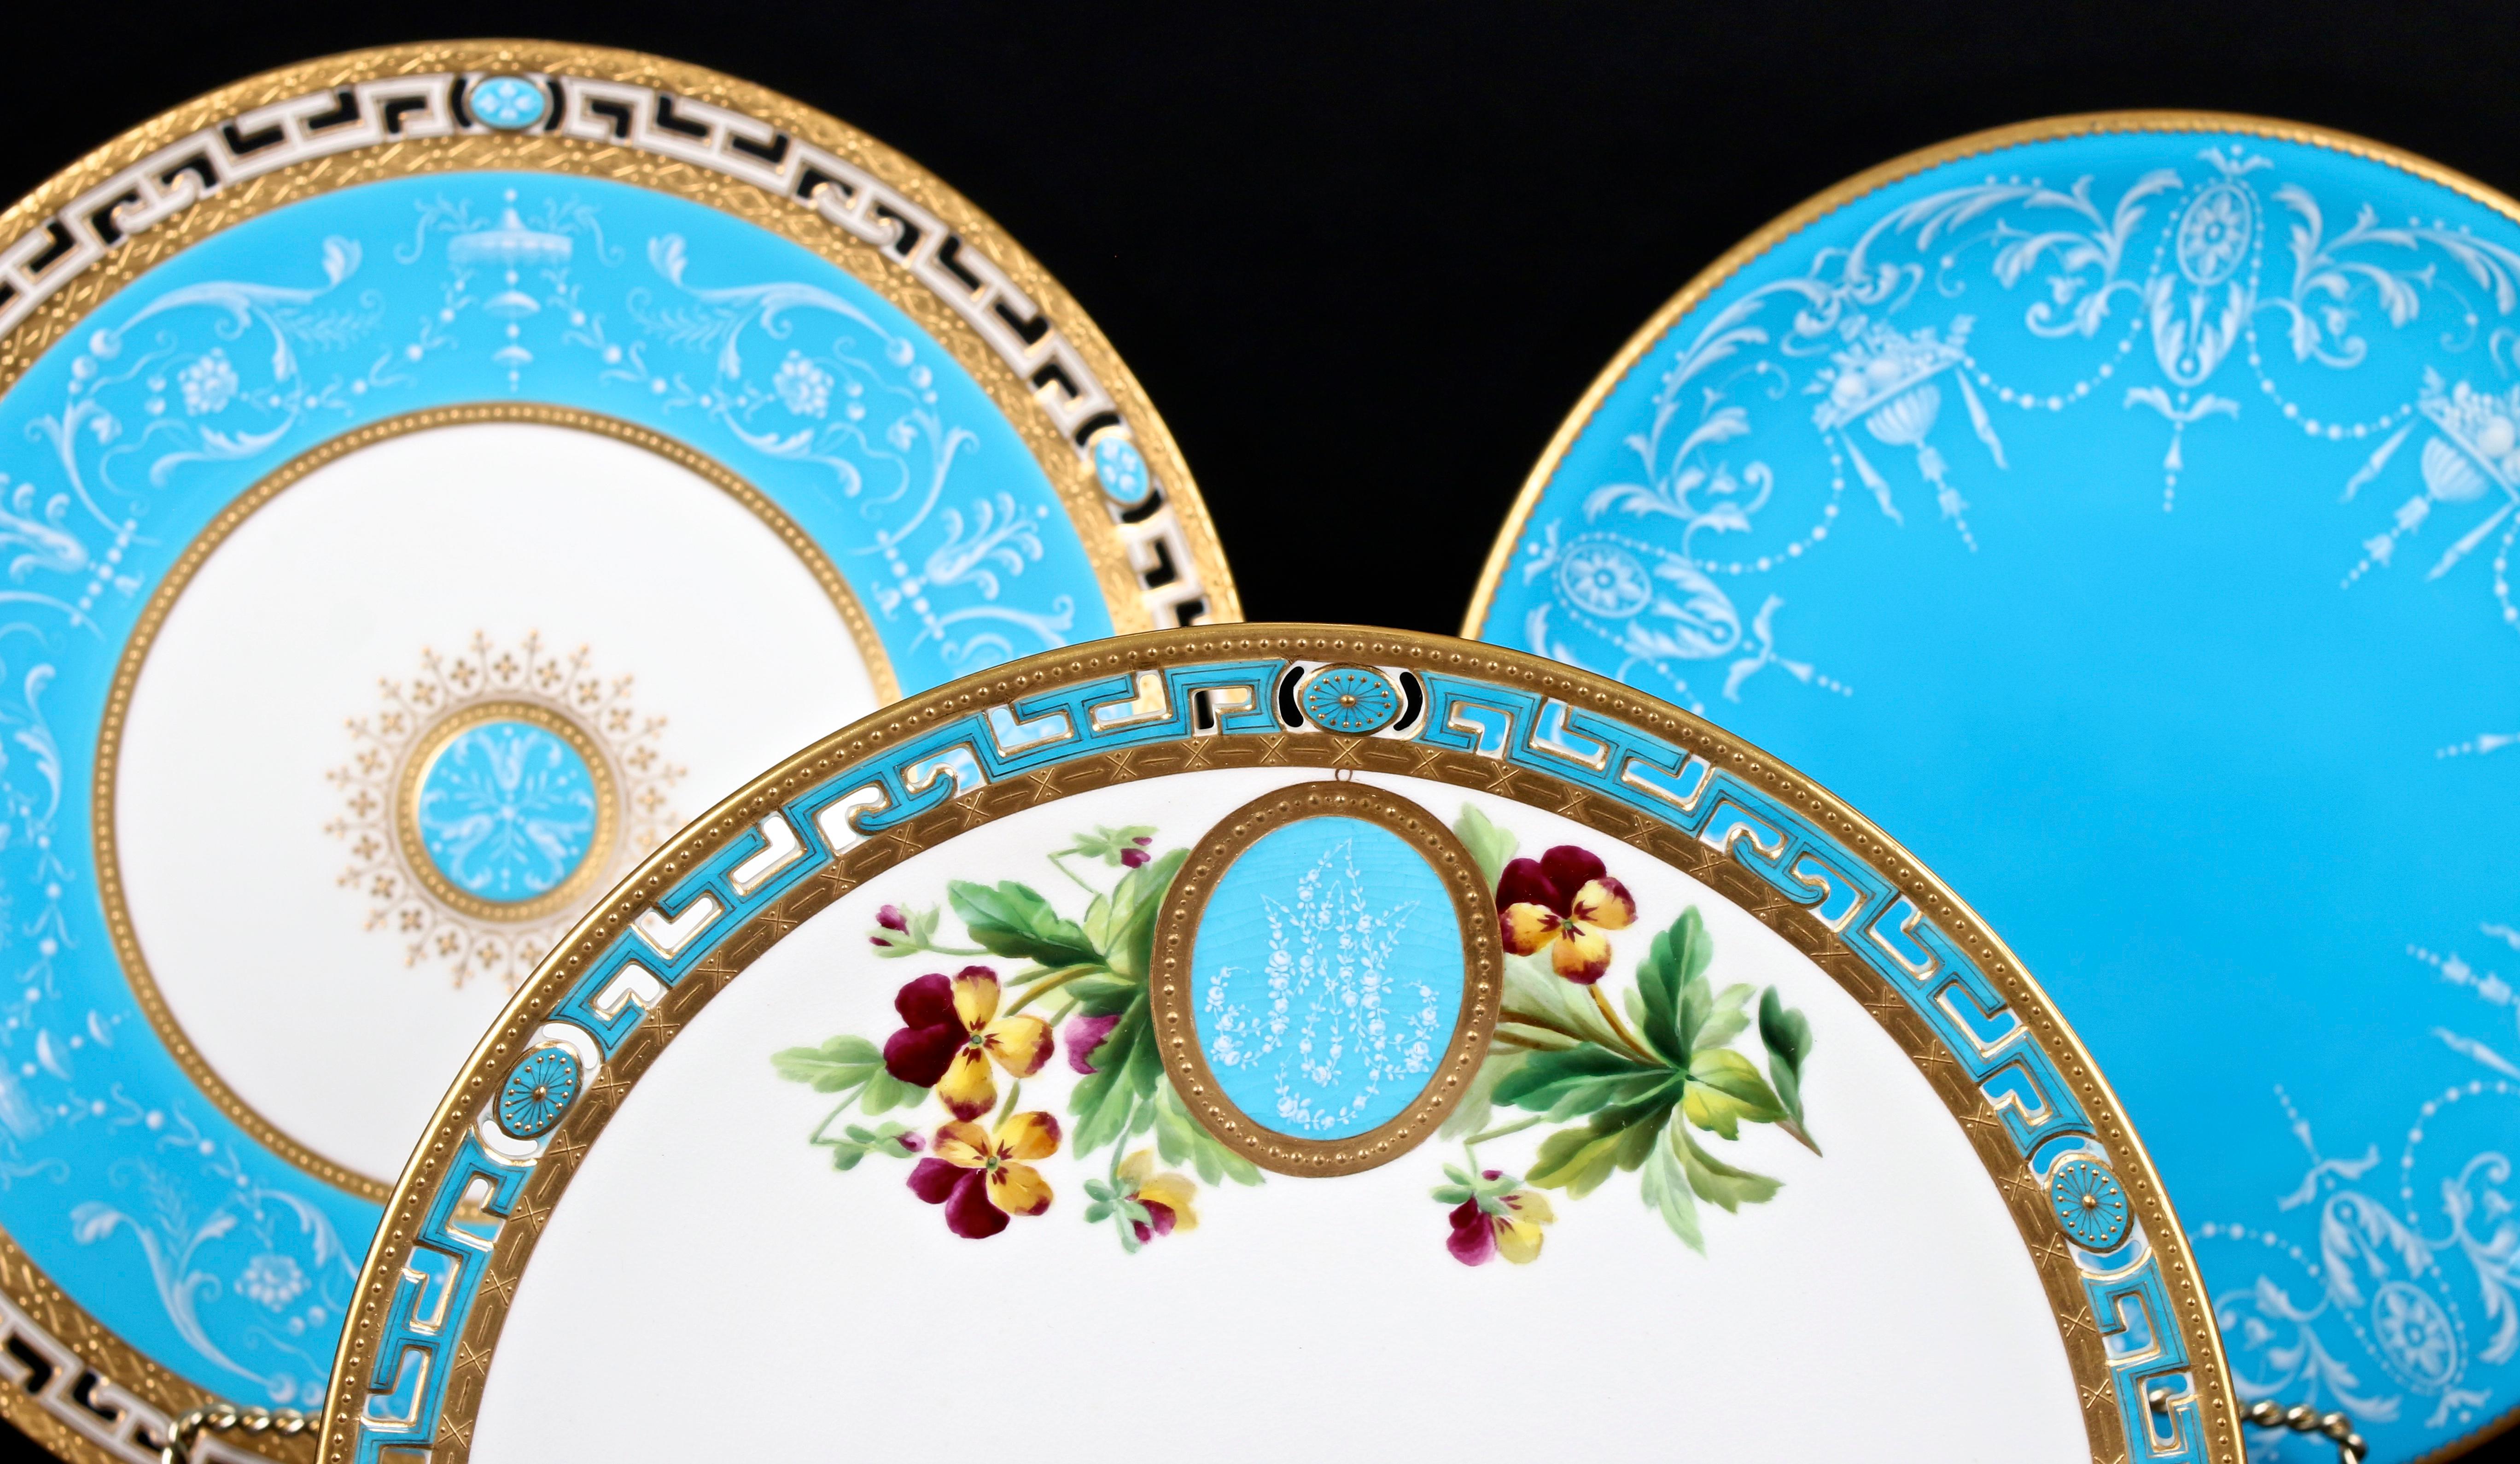 12 Antique Minton Pate-Sur-Pate Bleu Celeste Plates In Good Condition For Sale In New York, NY